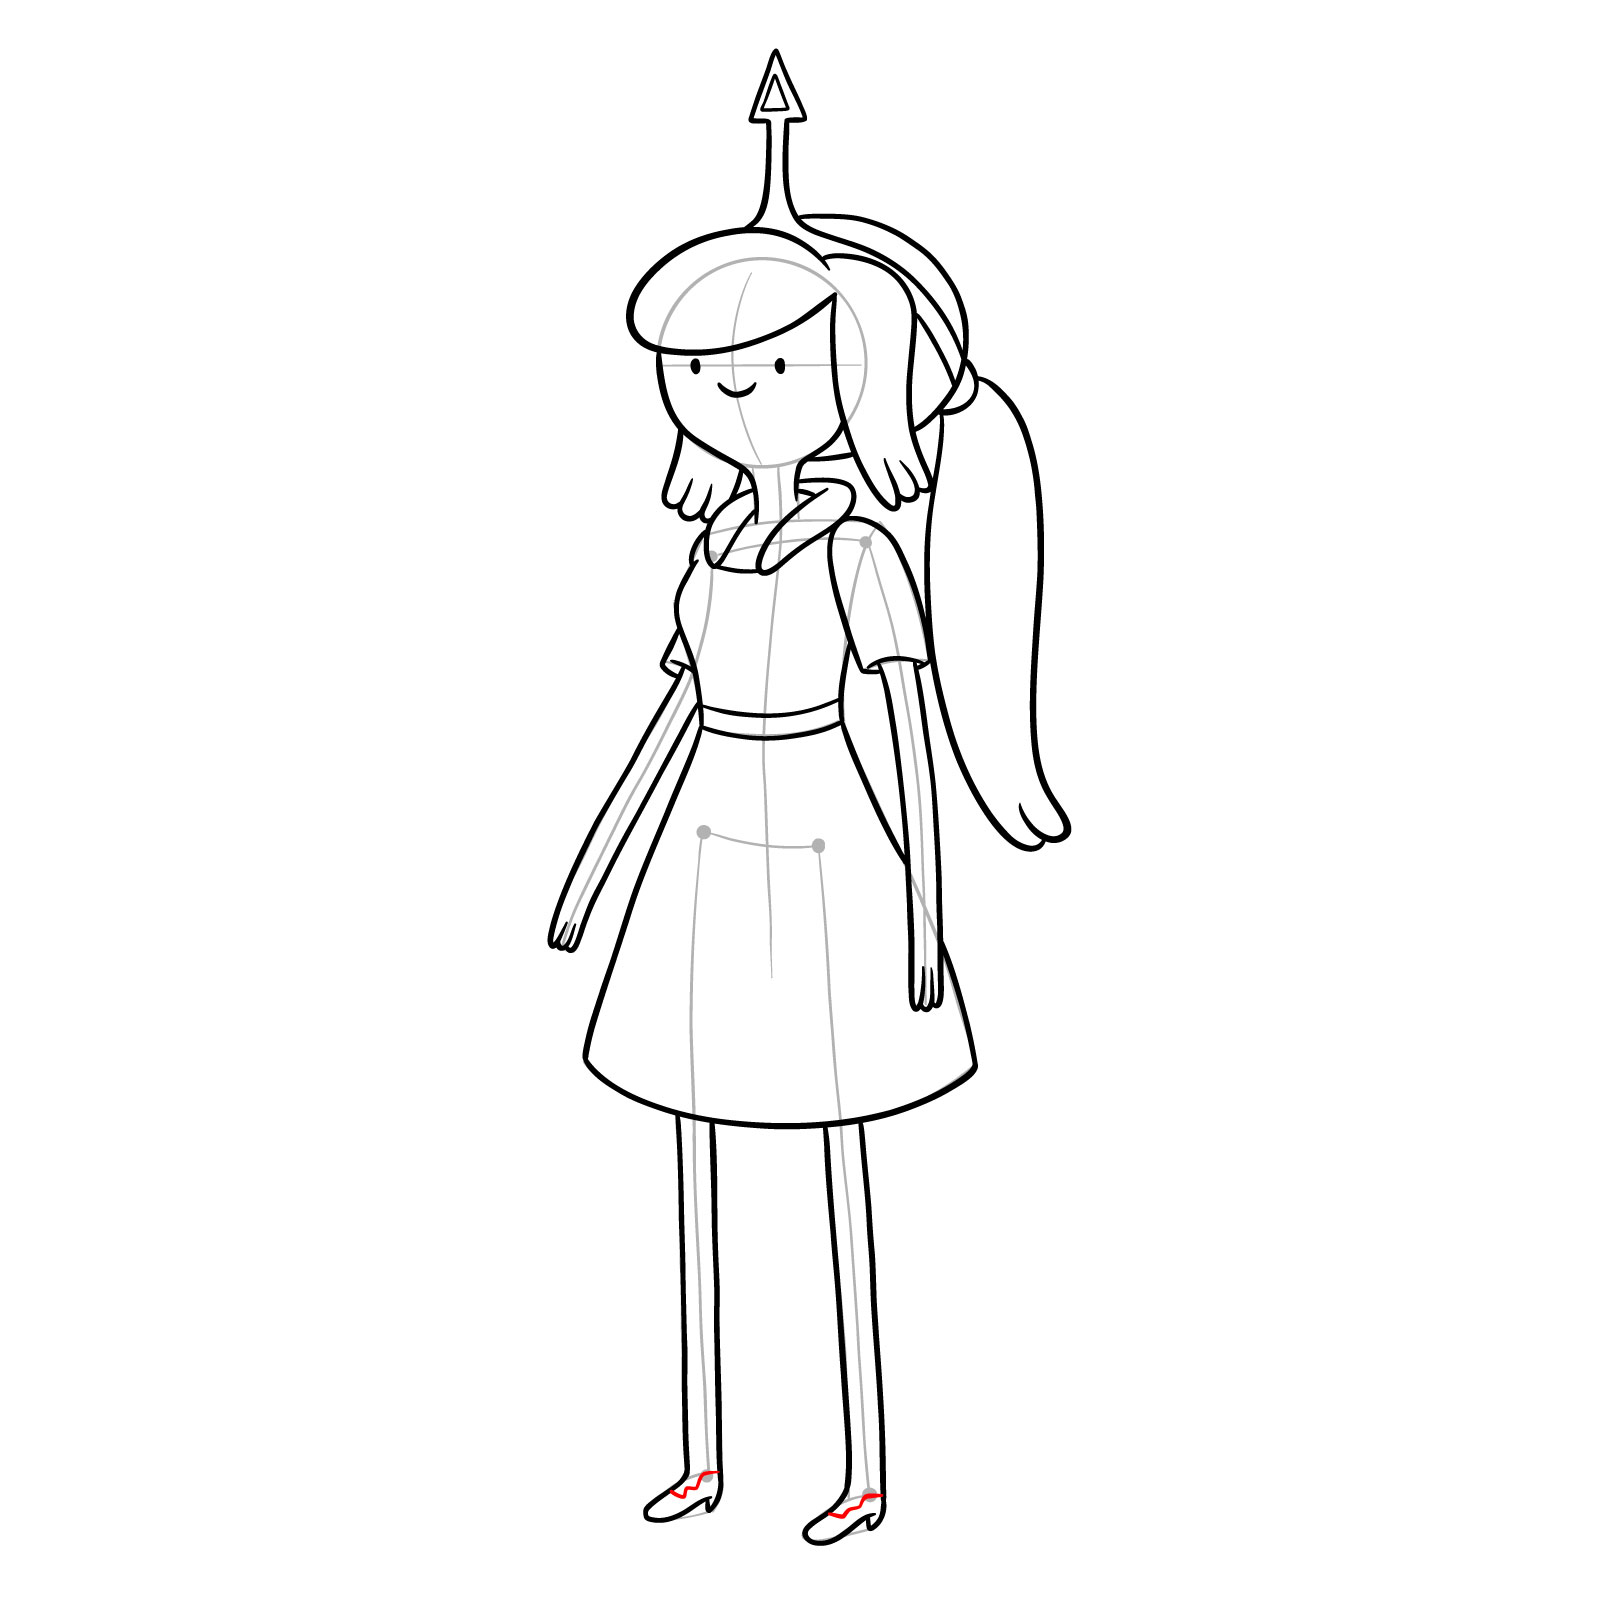 How to draw Princess Chewypaste from Adventure Time - step 22